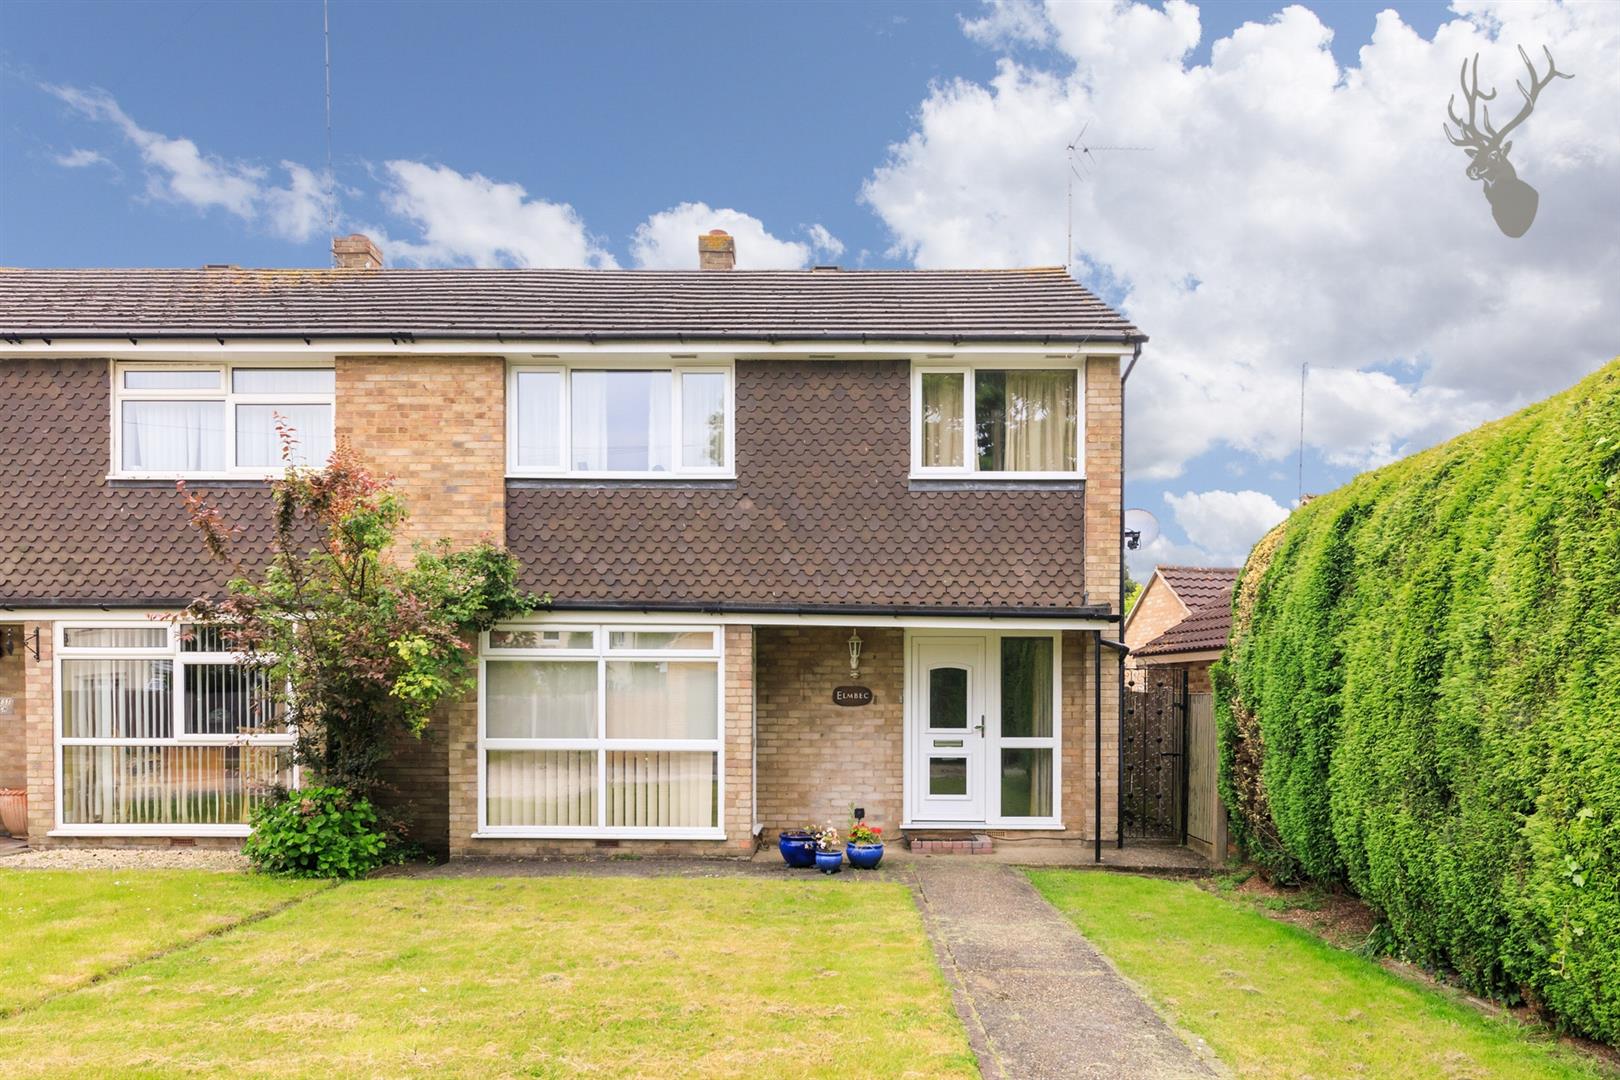 Similar Property: House - Detached in Epping